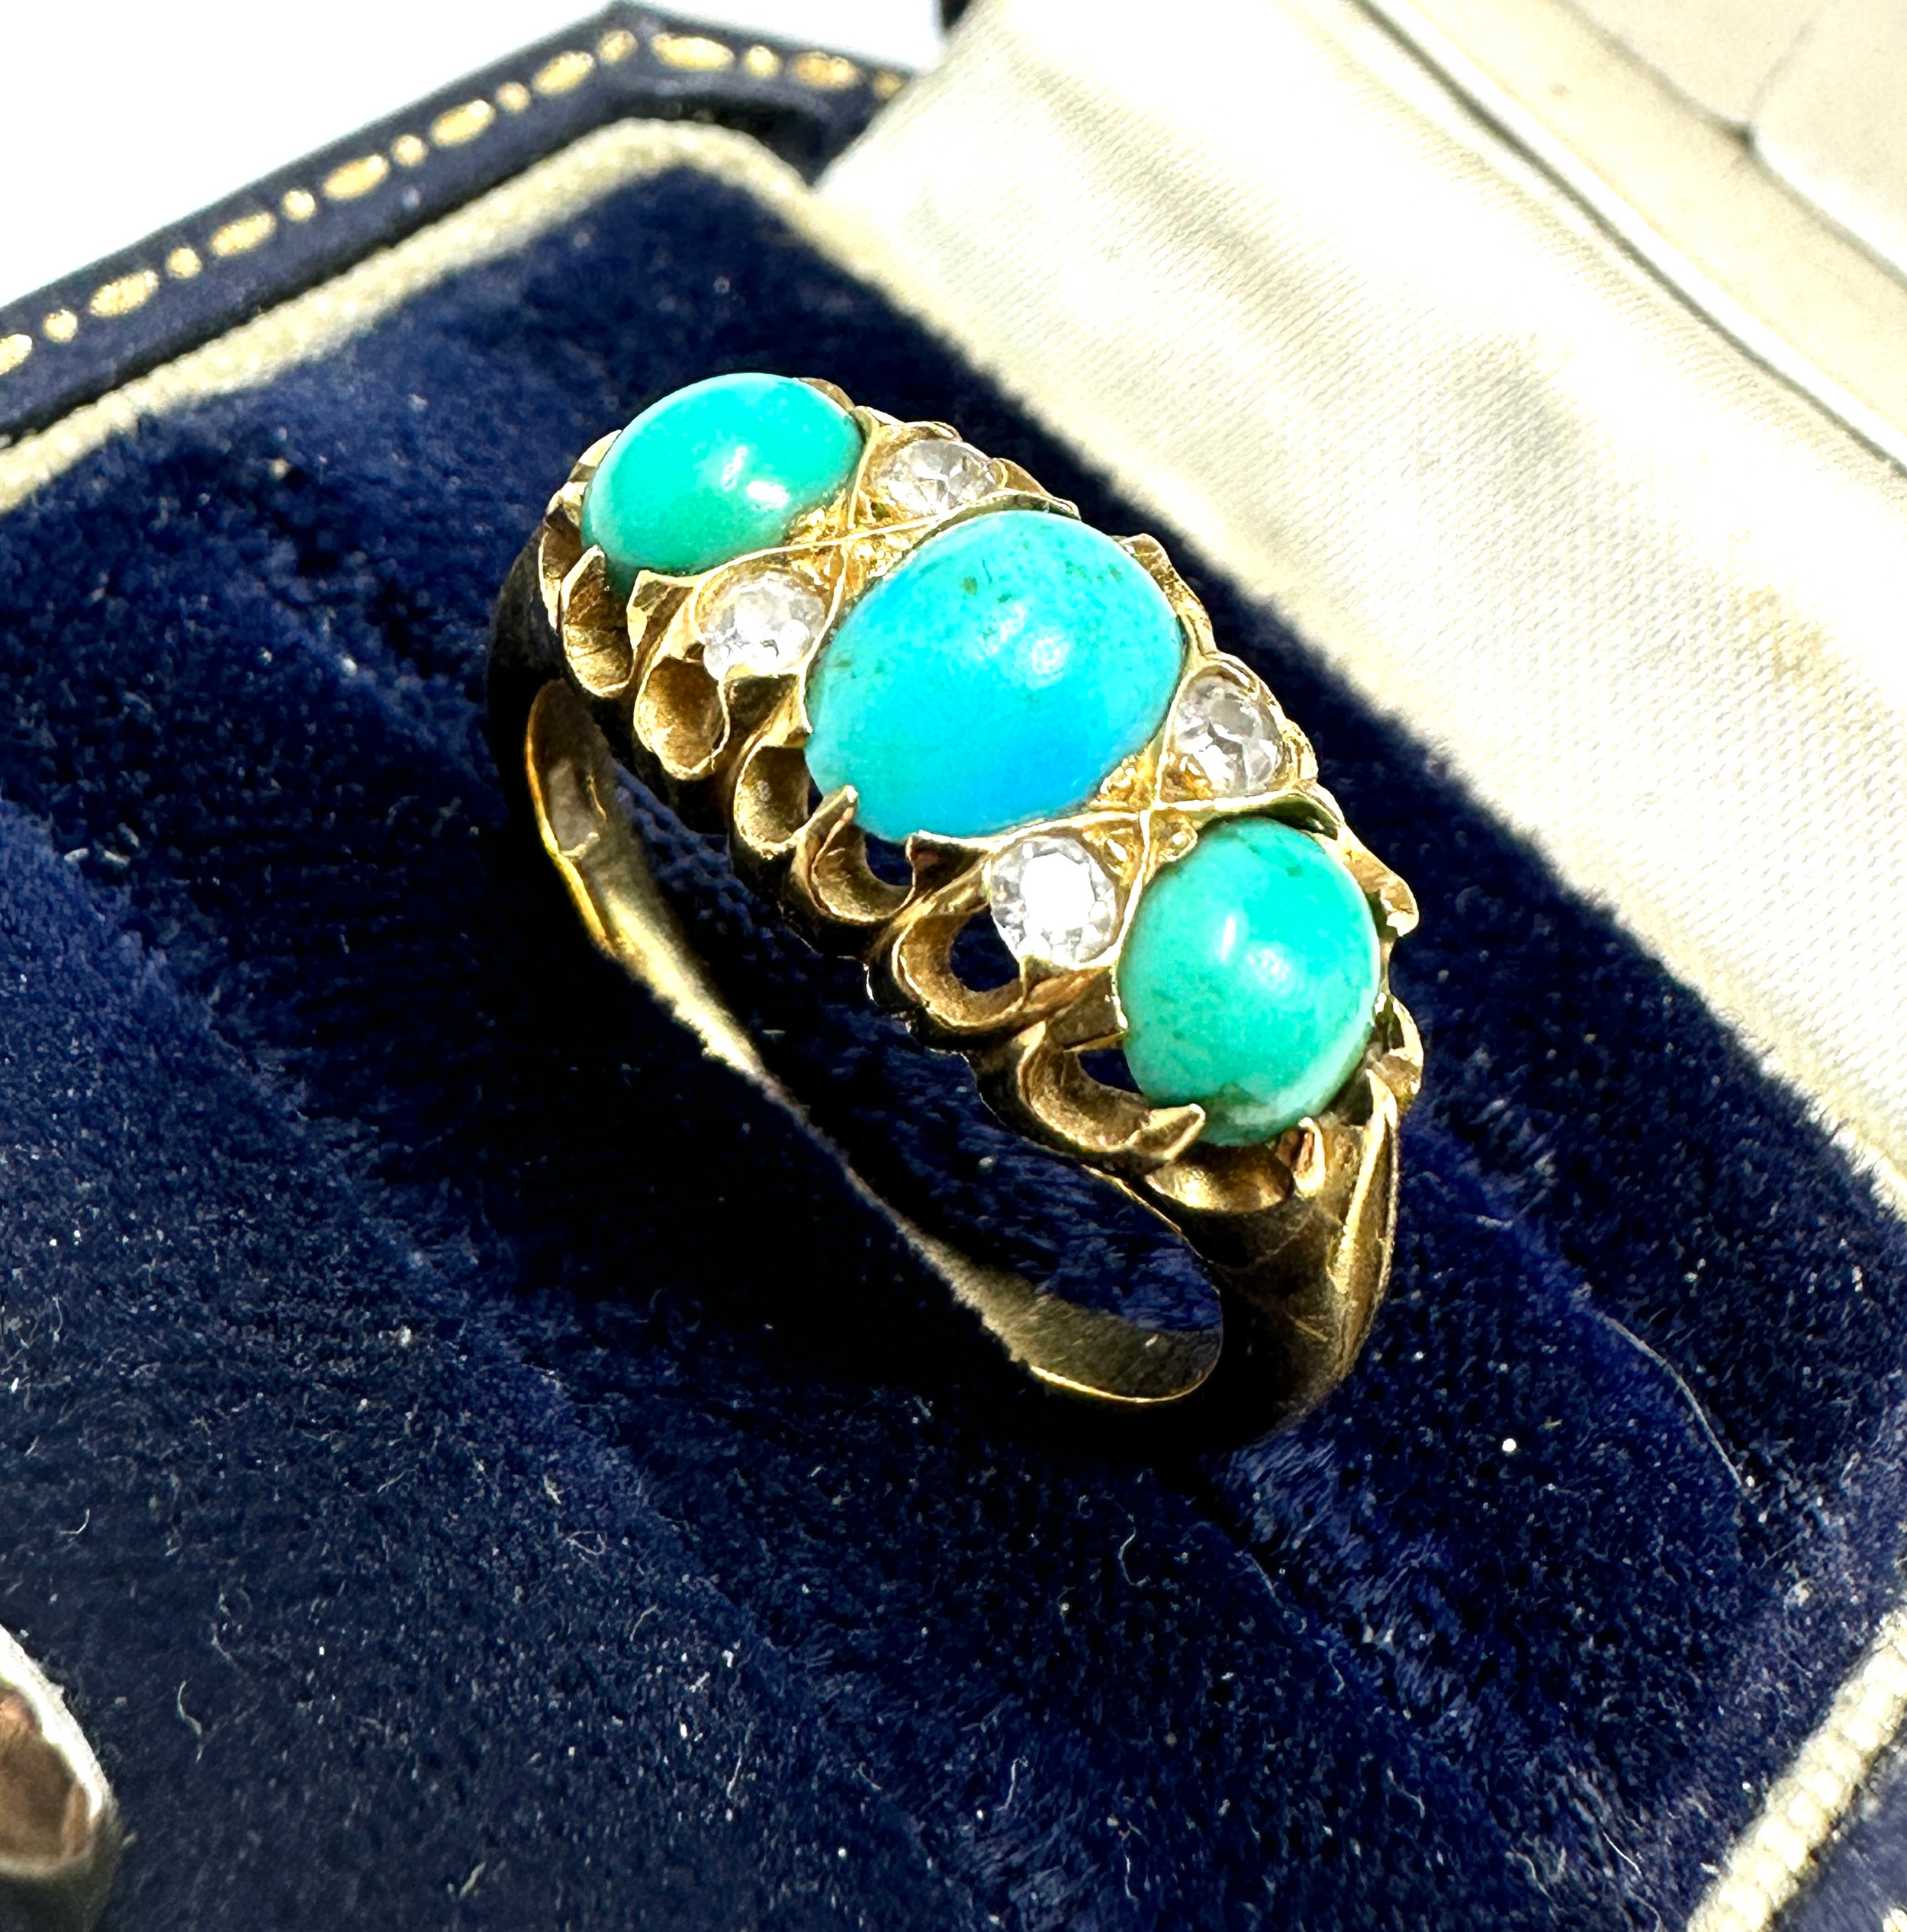 Antique 18ct turquoise & diamond ring weight 5.5g - Image 2 of 4